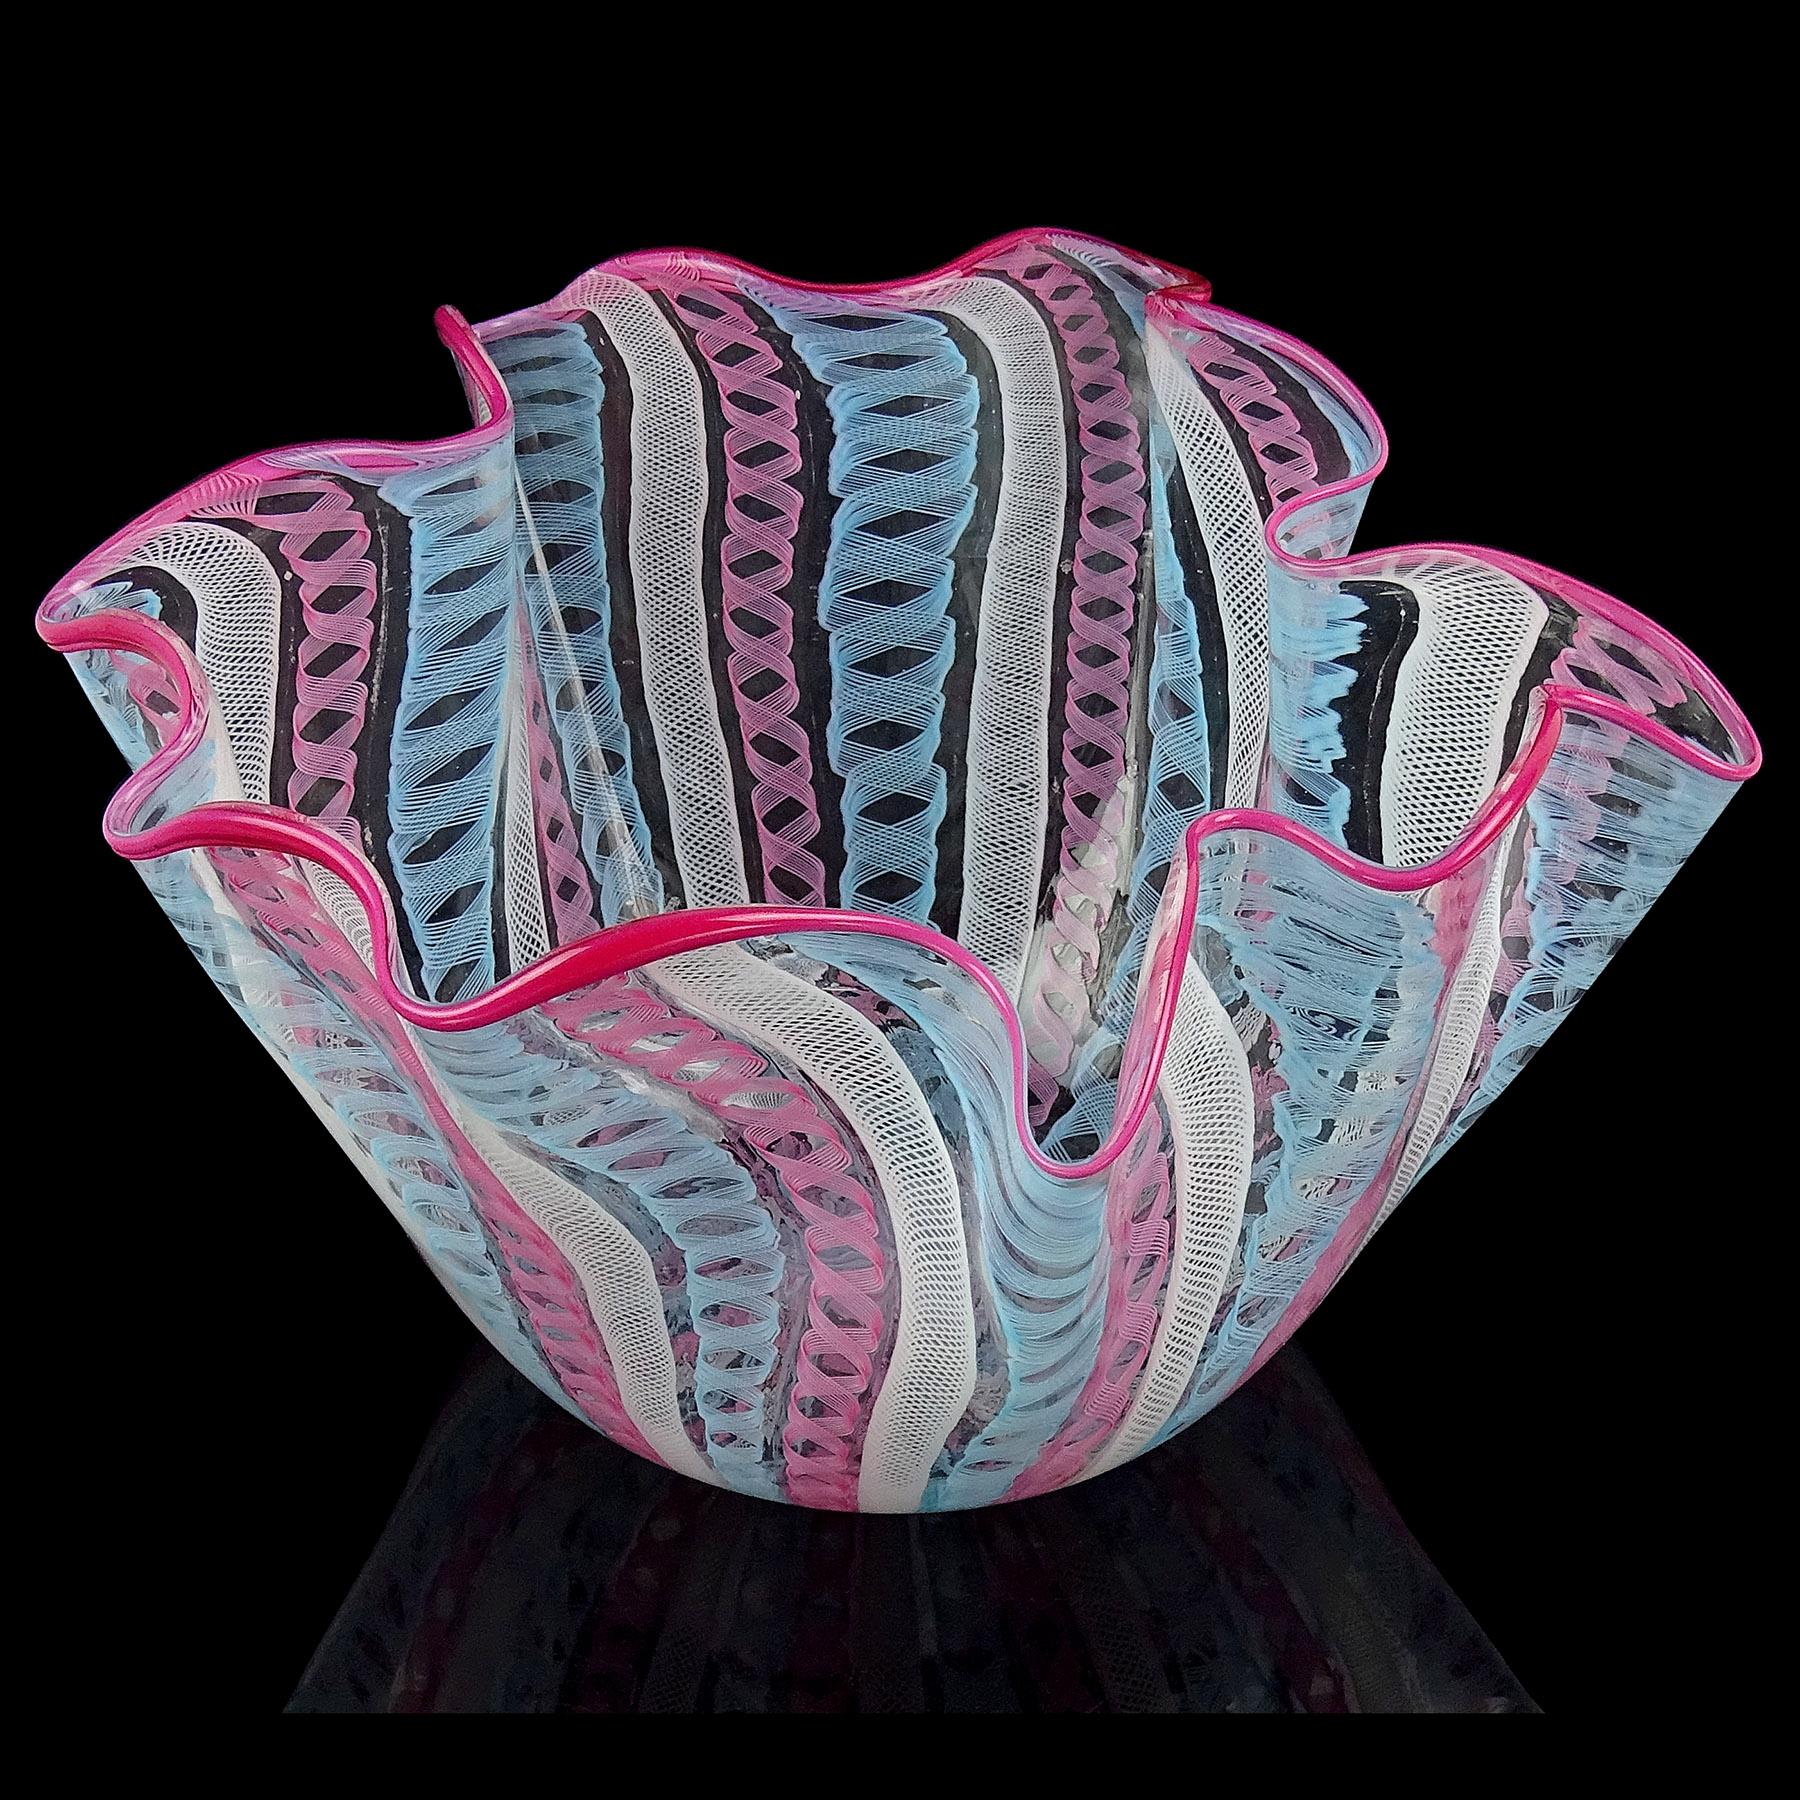 Gorgeous, and large, vintage Murano hand blown pink, sky blue, and white ribbons Italian art glass handkerchief / fazzoletto vase centerpiece. Documented to the Fratelli Toso company, with similars published in his book. The vase has 3 different